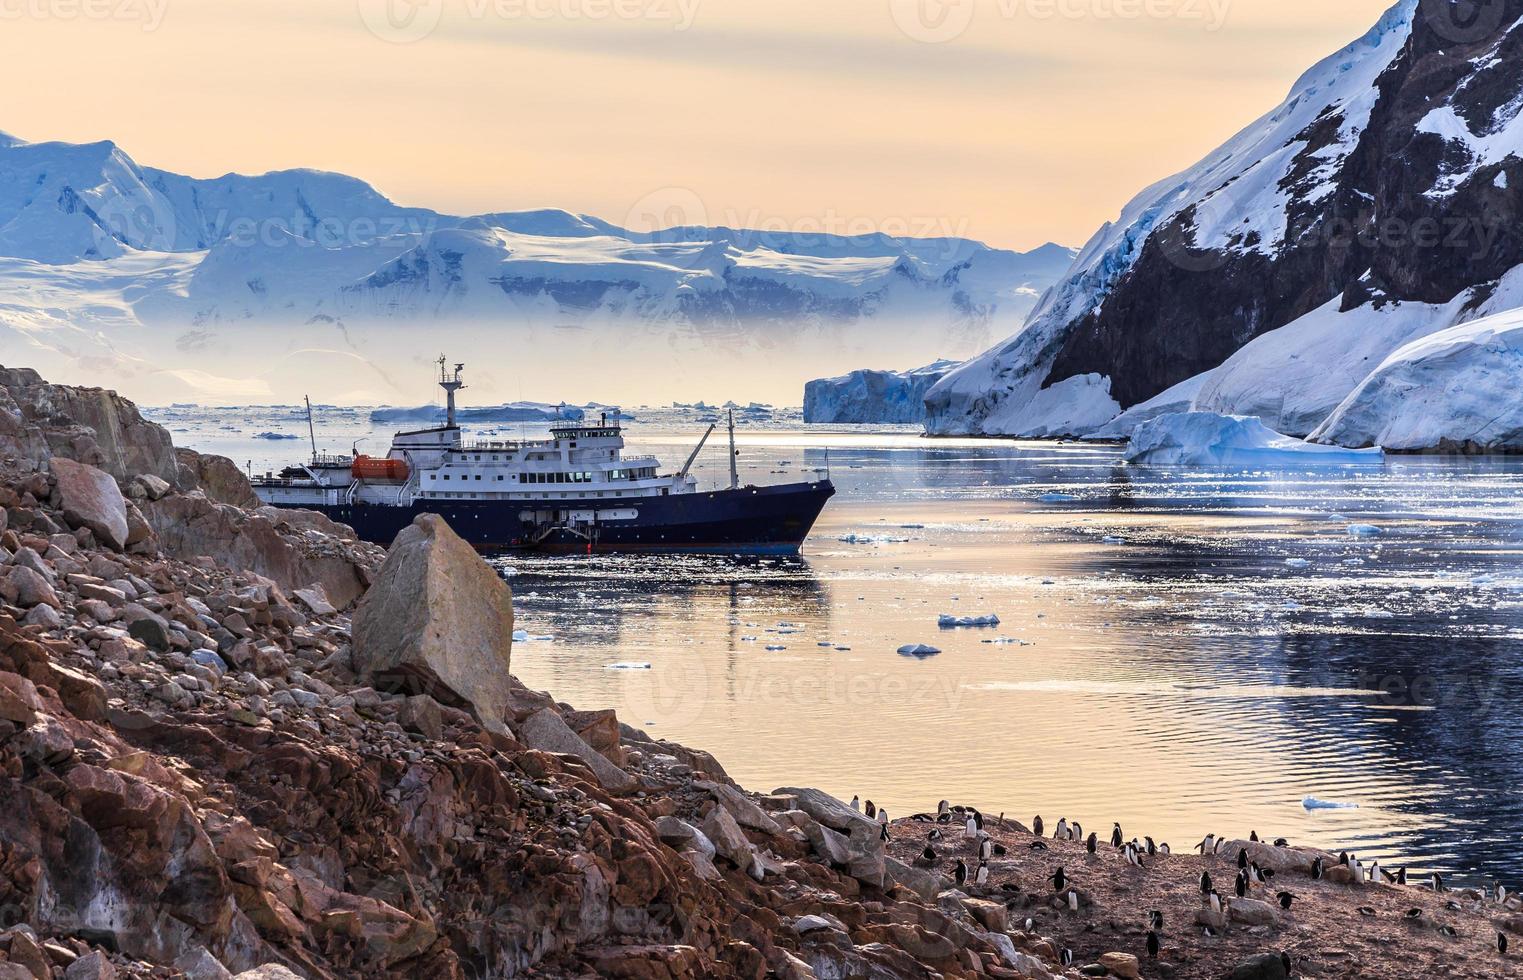 Antarctic cruise ship among icebergs and Gentoo penguins gathered on the rocky shore of Neco bay, Antarctica photo